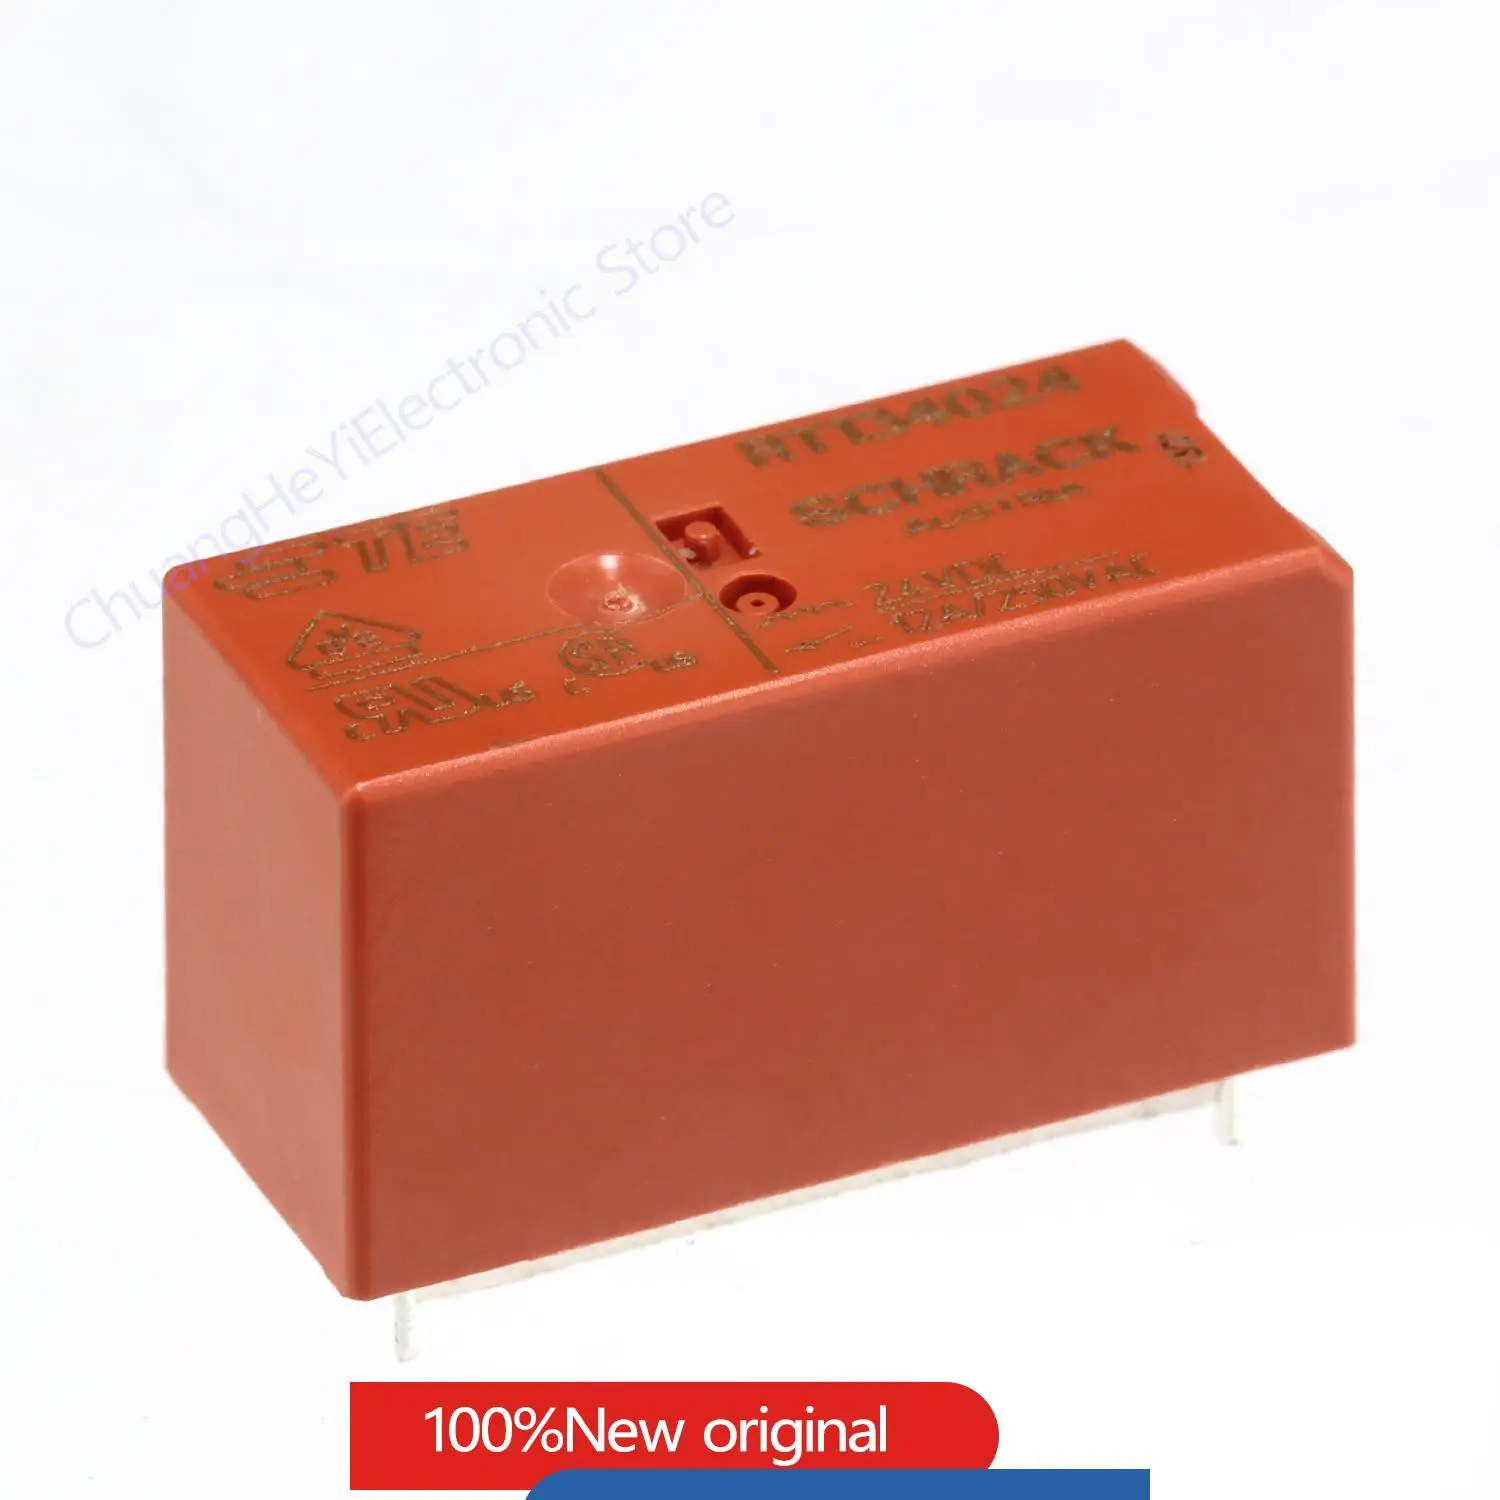 

20PCS/Lot 100%Original New TE TYCO Relay RT134024 12A 24VDC 4PIN A group of normally open replace HF115F-024-1HS1